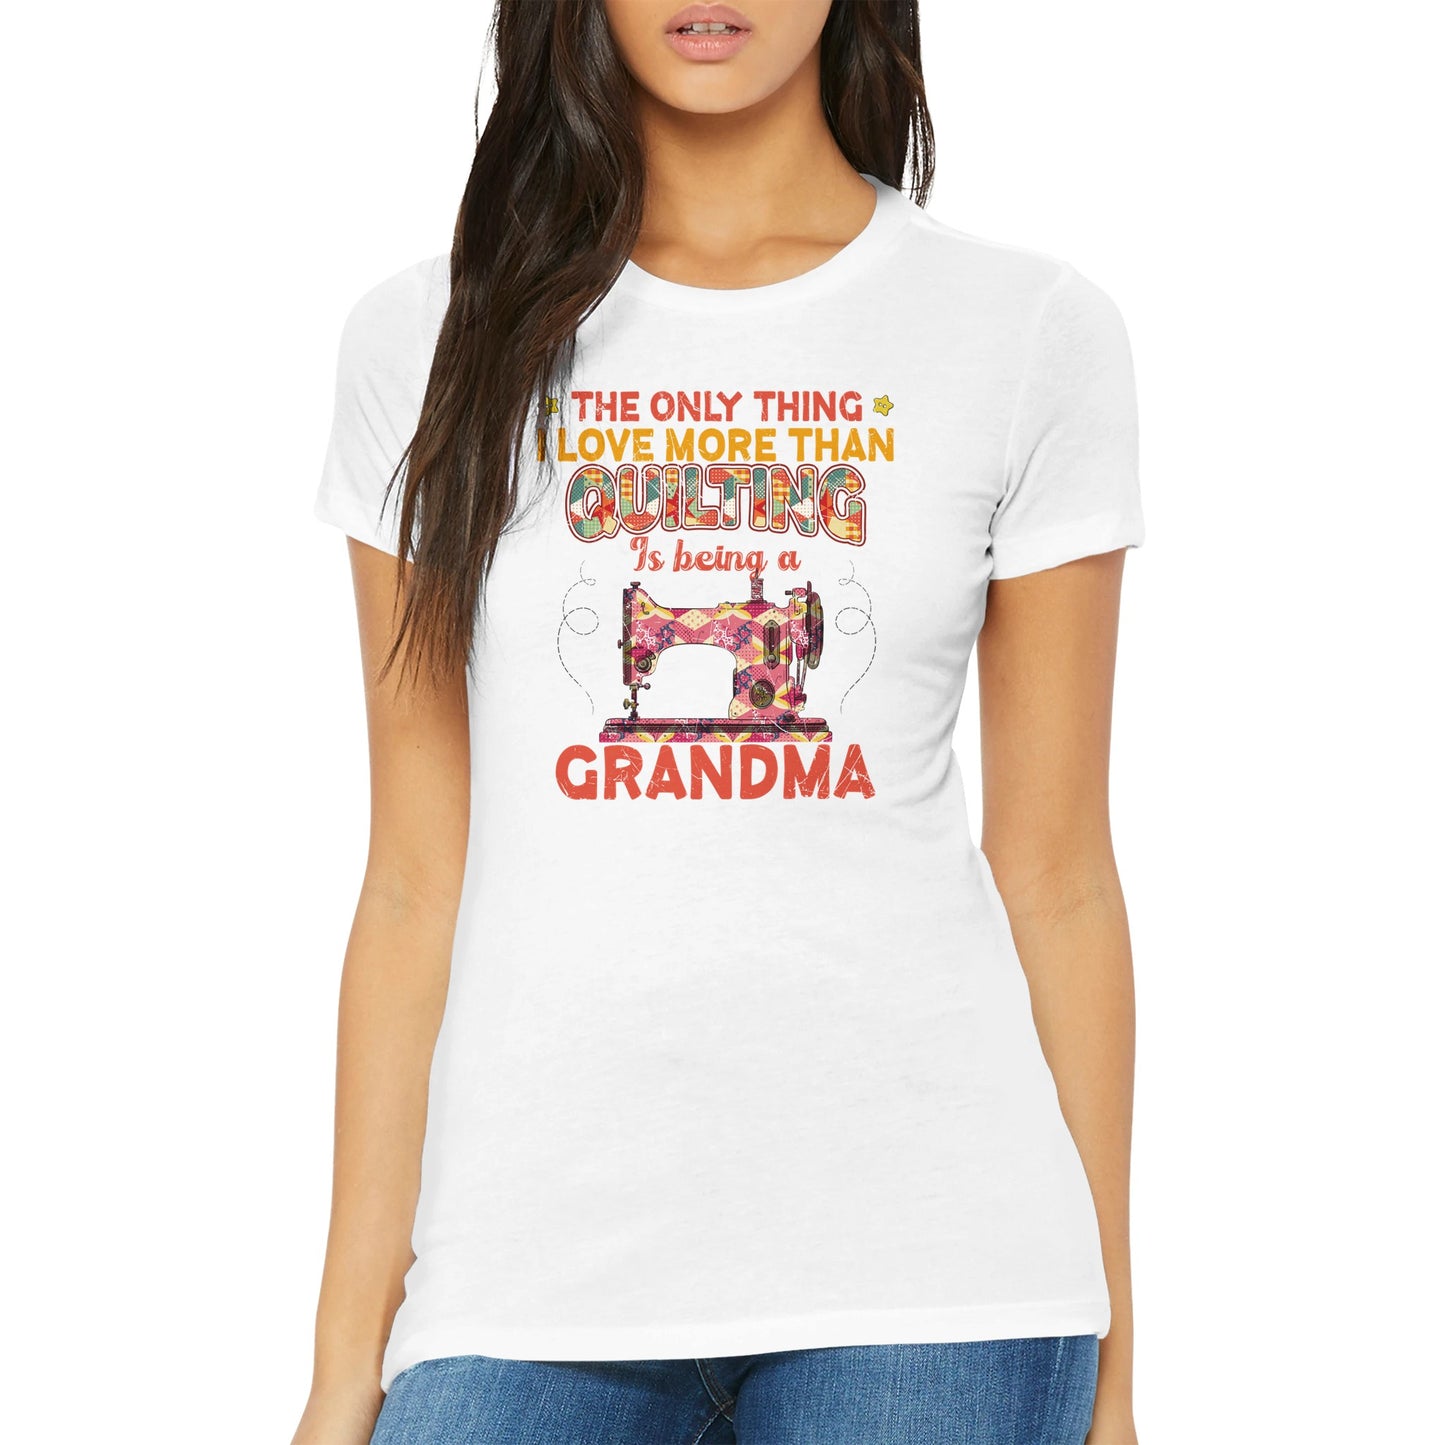 The Only Thing I Love More Than Quilting Is Being A Grandma - Premium Women's Crewneck T-shirt